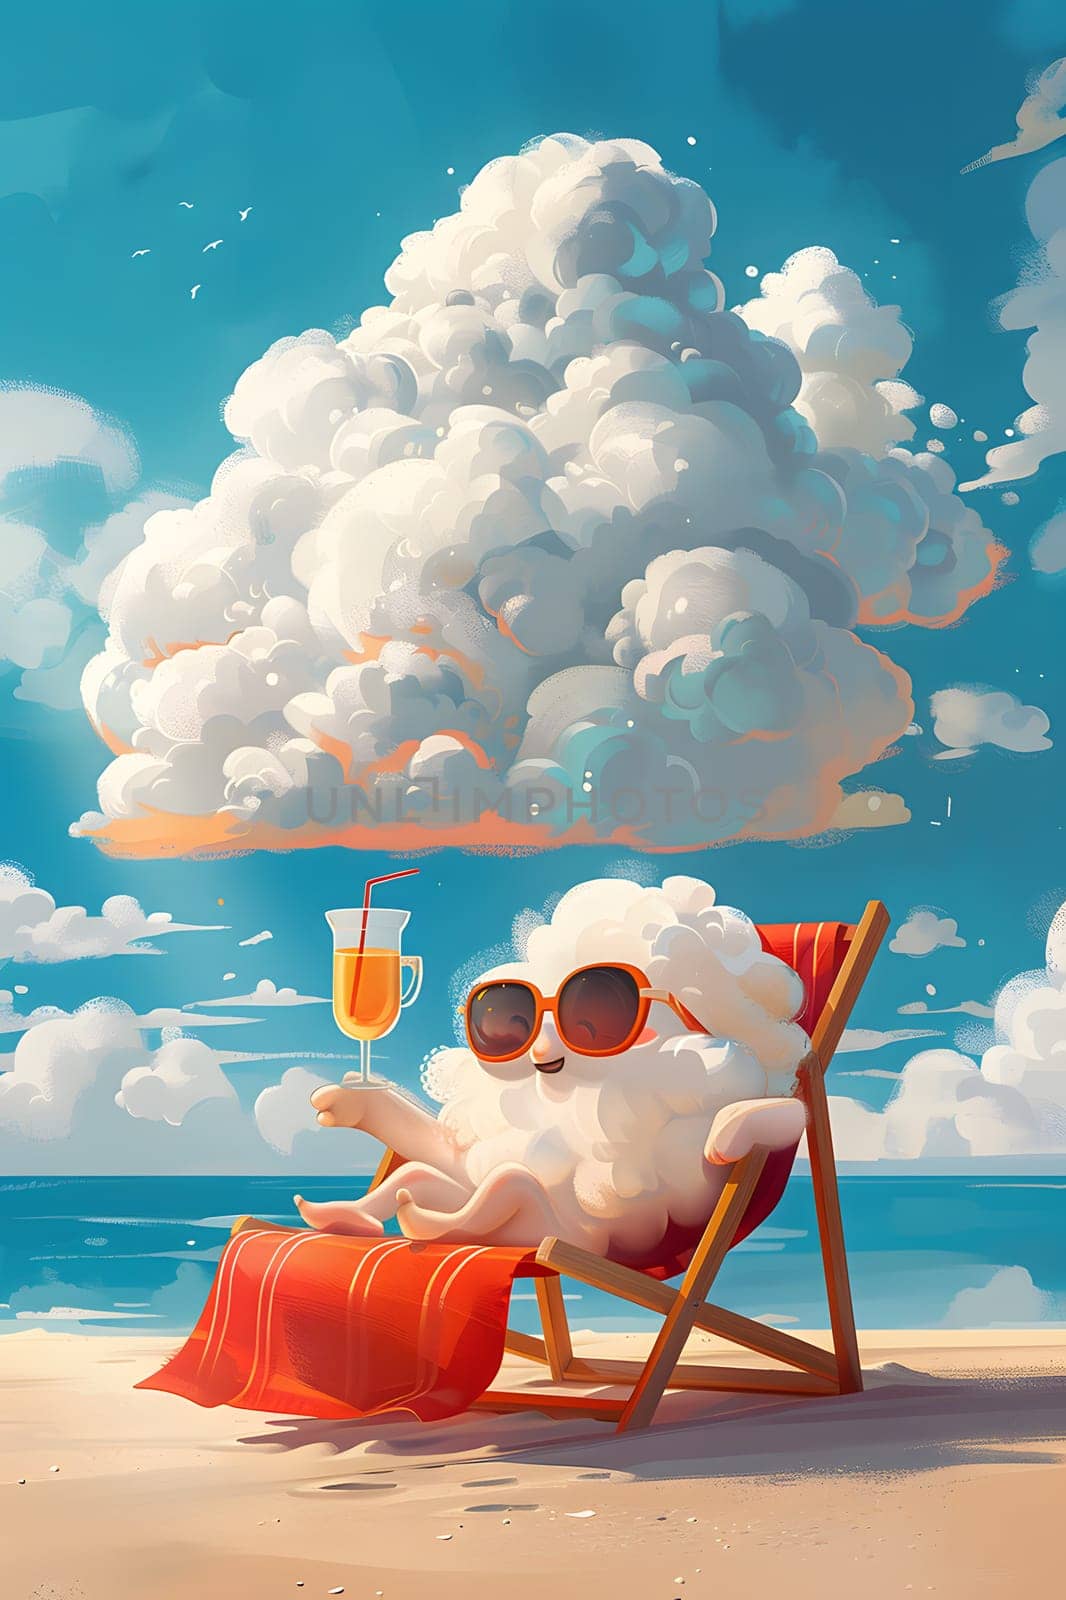 A cumulus cloud hangs in the sky as a sheep relaxes in a chair on the beach, sipping orange juice. People on the beach are happy, creating art in nature during leisure travel